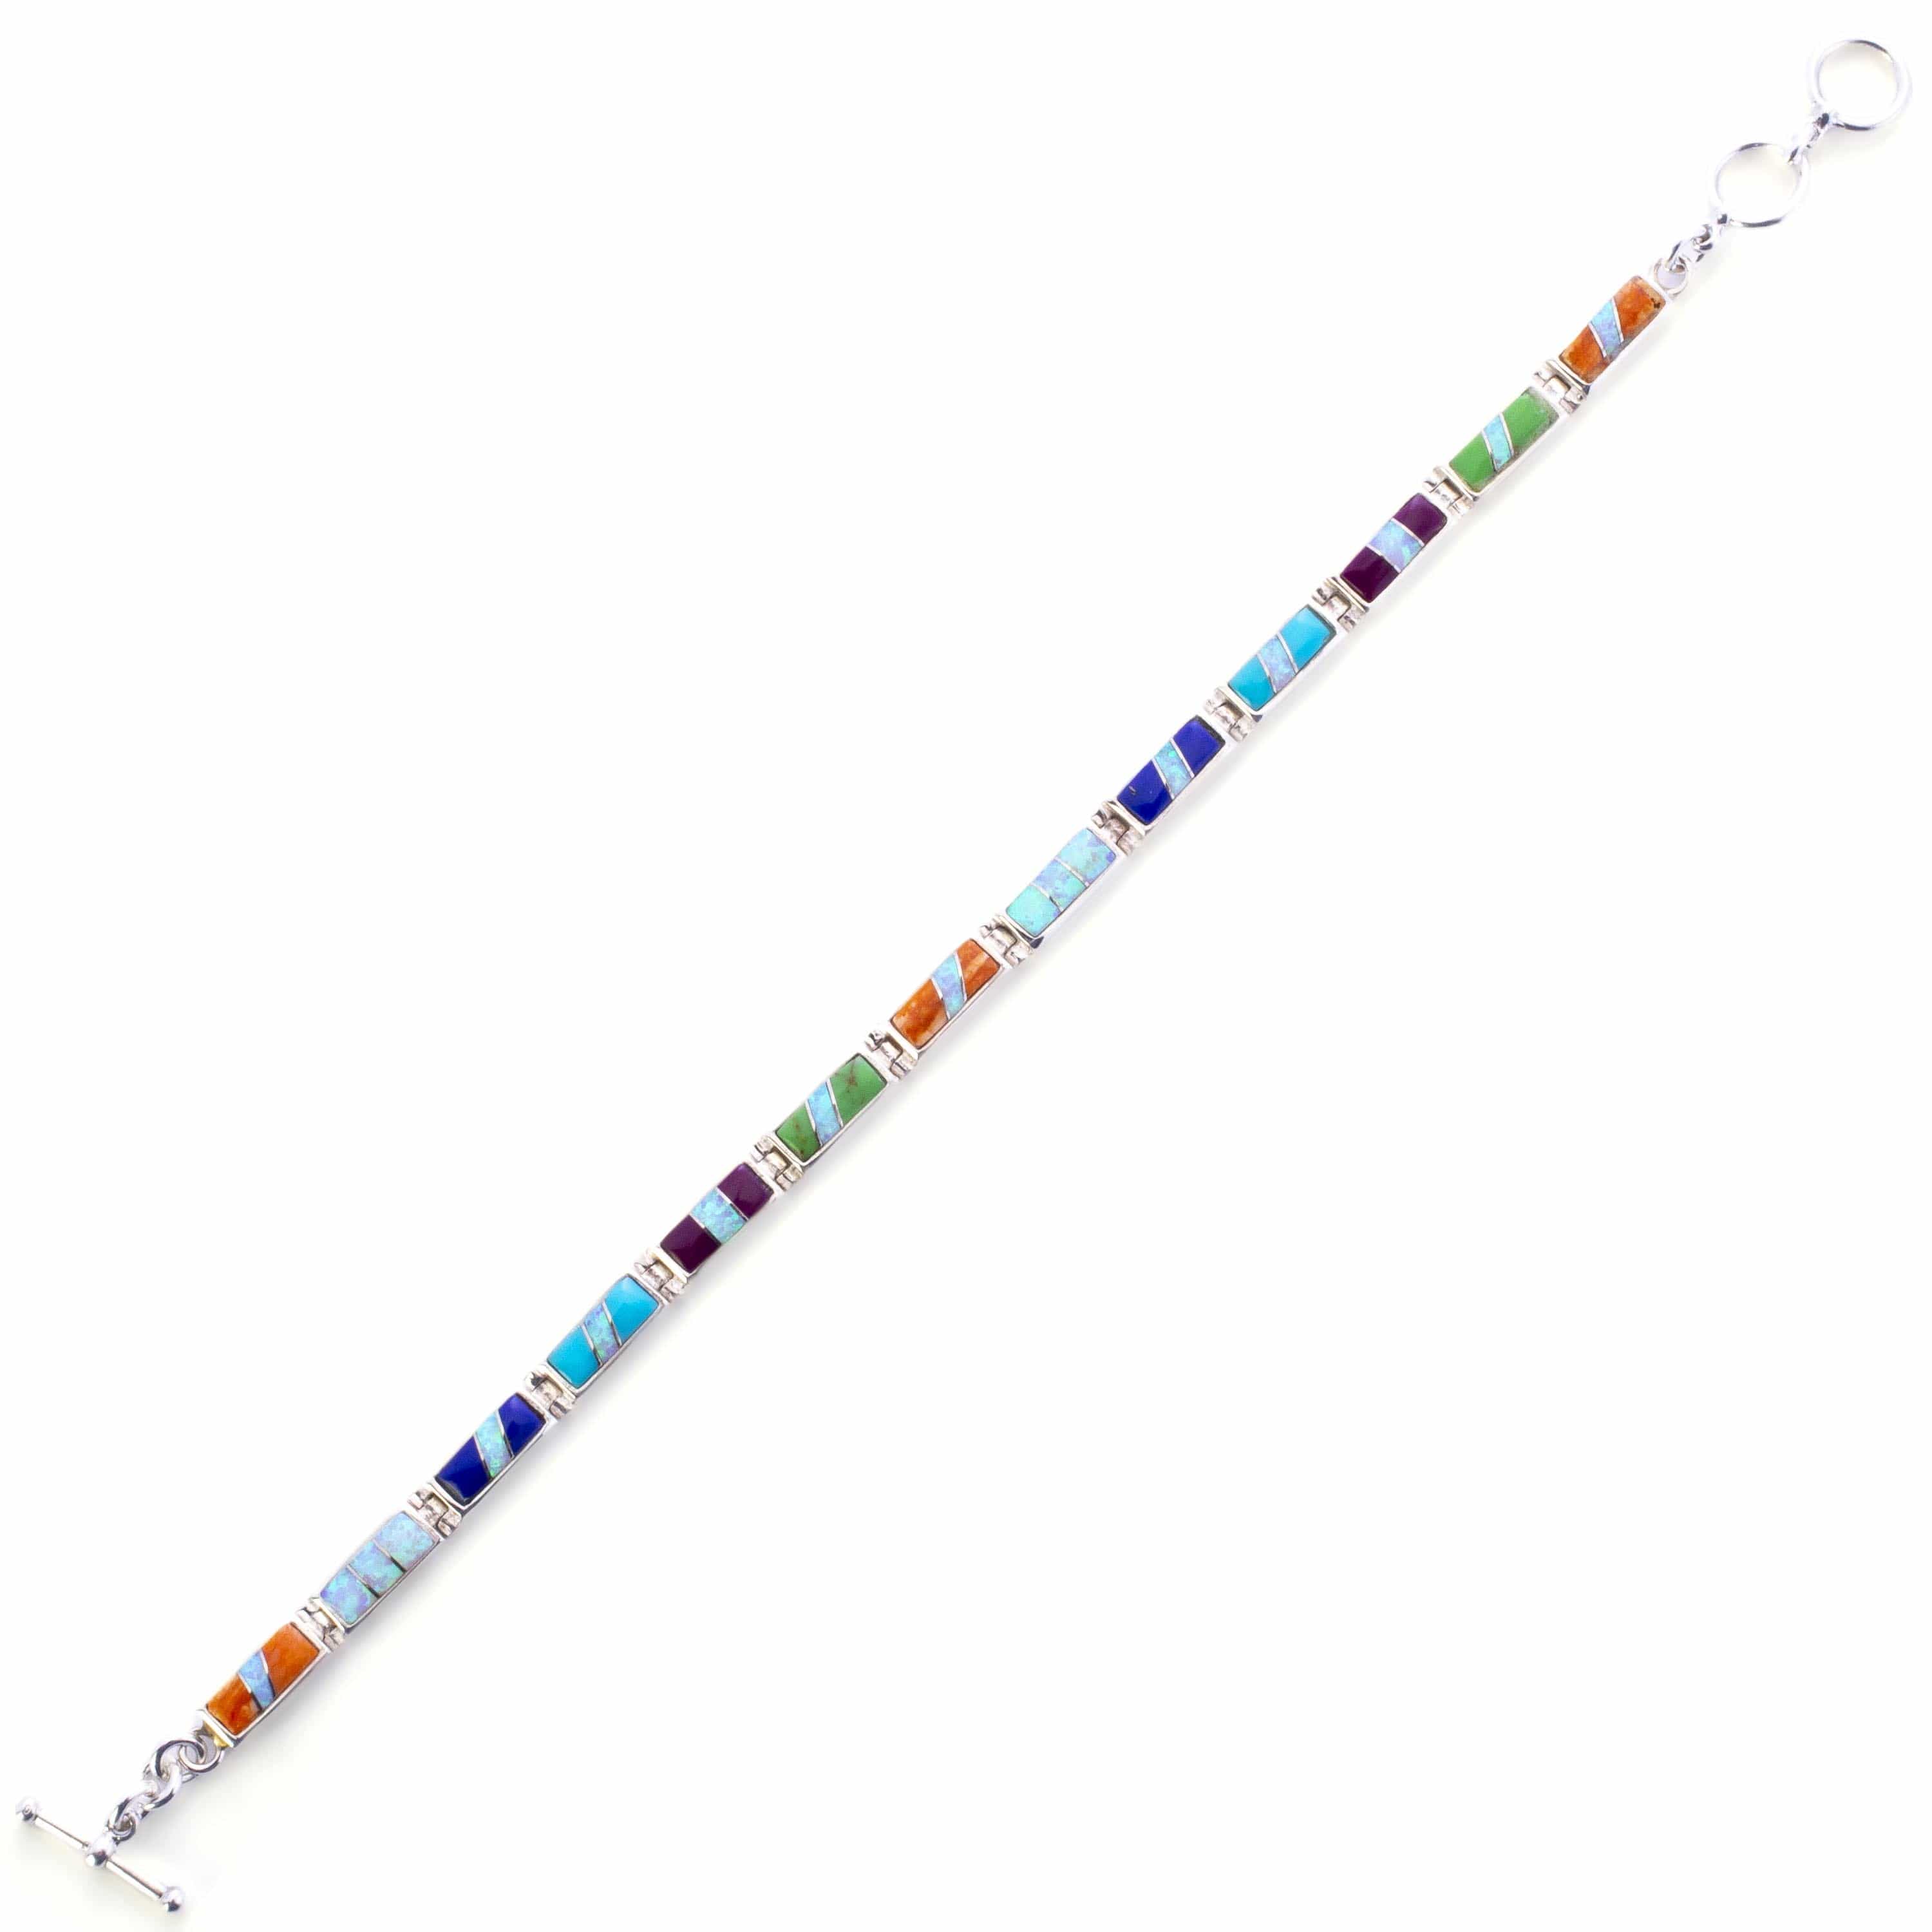 Kalifano Southwest Silver Jewelry Multi Gemstone 925 Sterling Silver Bracelet USA Handmade with Opal Accent NMB.0224.MT